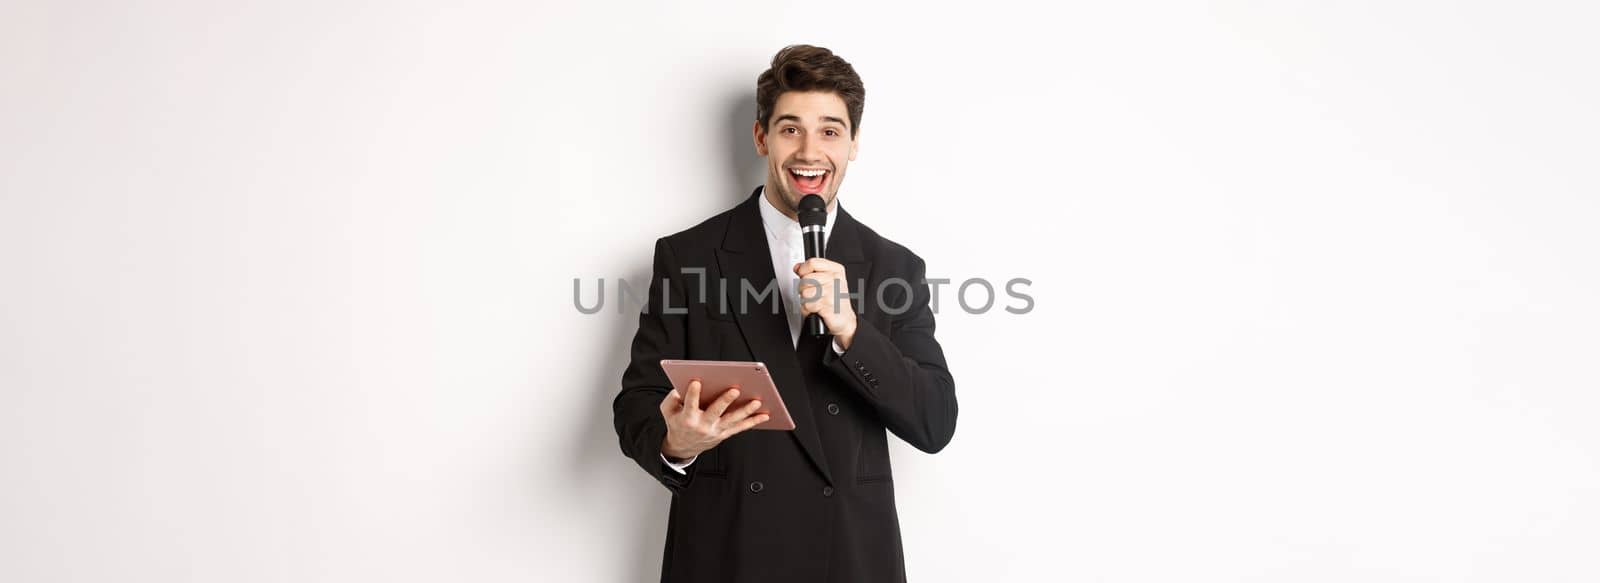 Image of handsome male performer, giving a speech, entertain people at party, holding microphone and digital tablet, standing over white background.